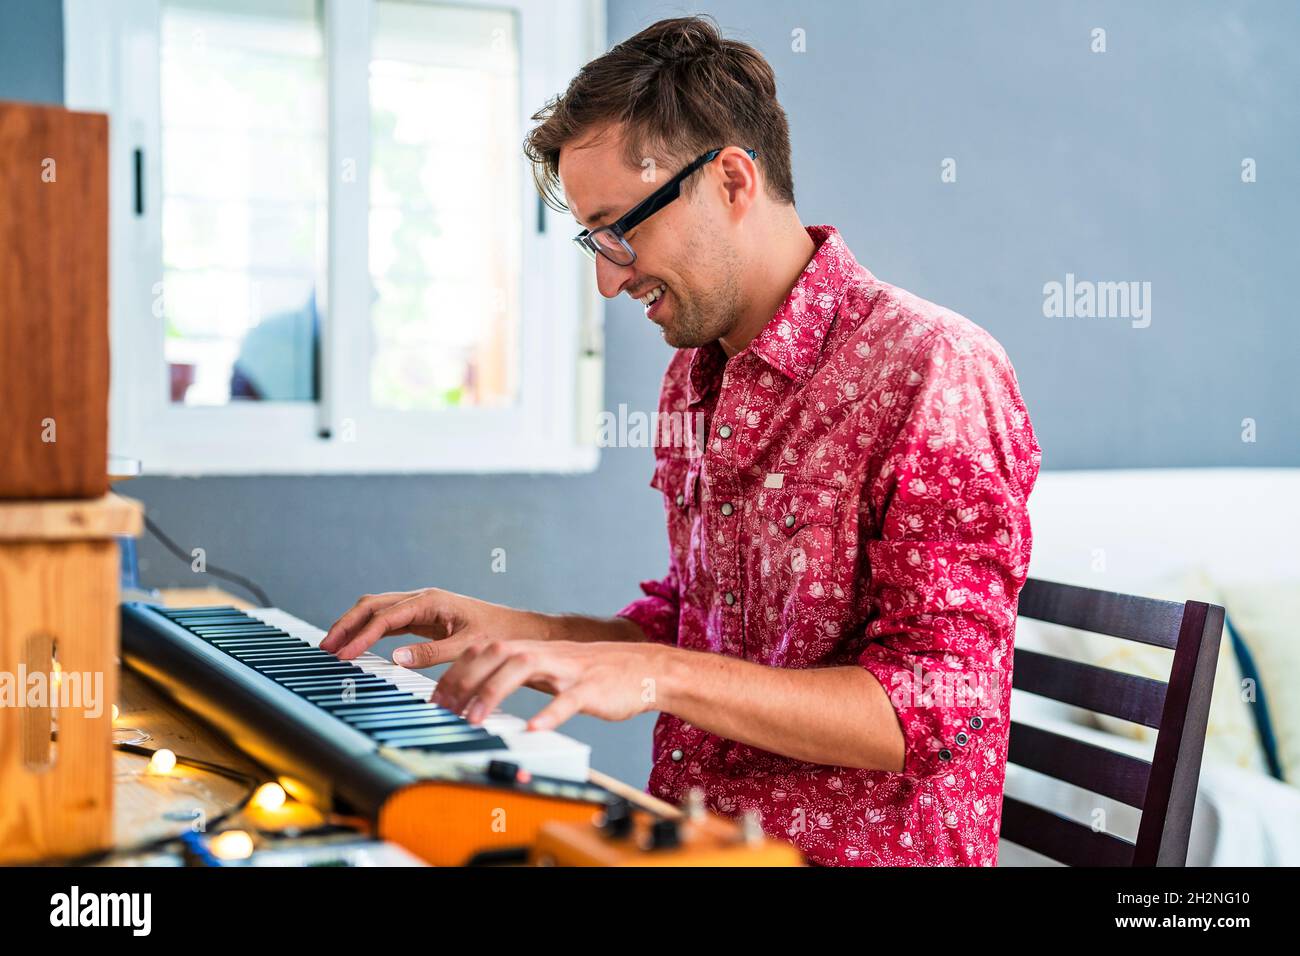 Smiling man with eyeglasses playing piano at home Stock Photo